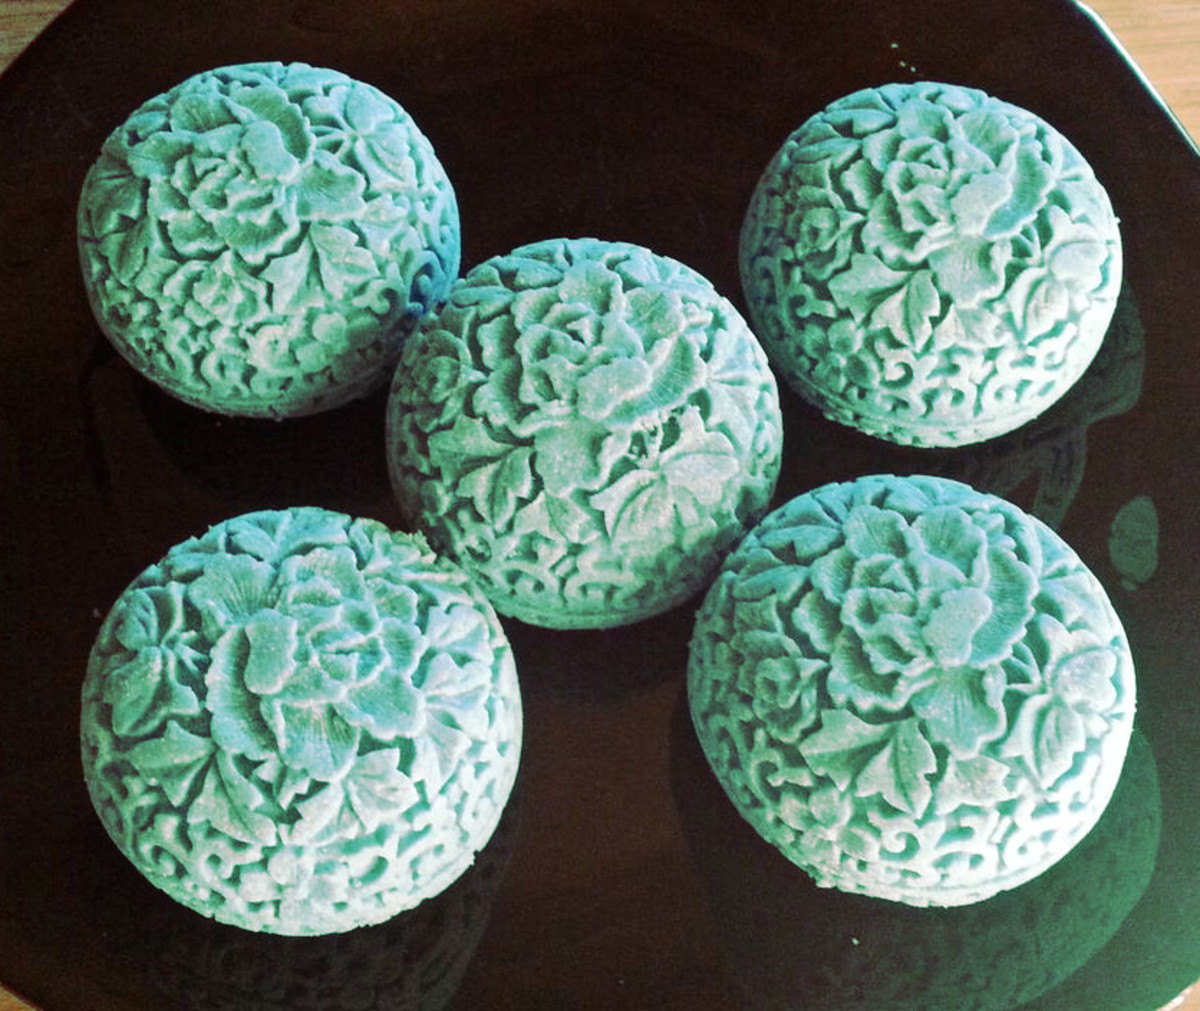 Bath bombs made using 30 drops of the Teal LaBomb colorant